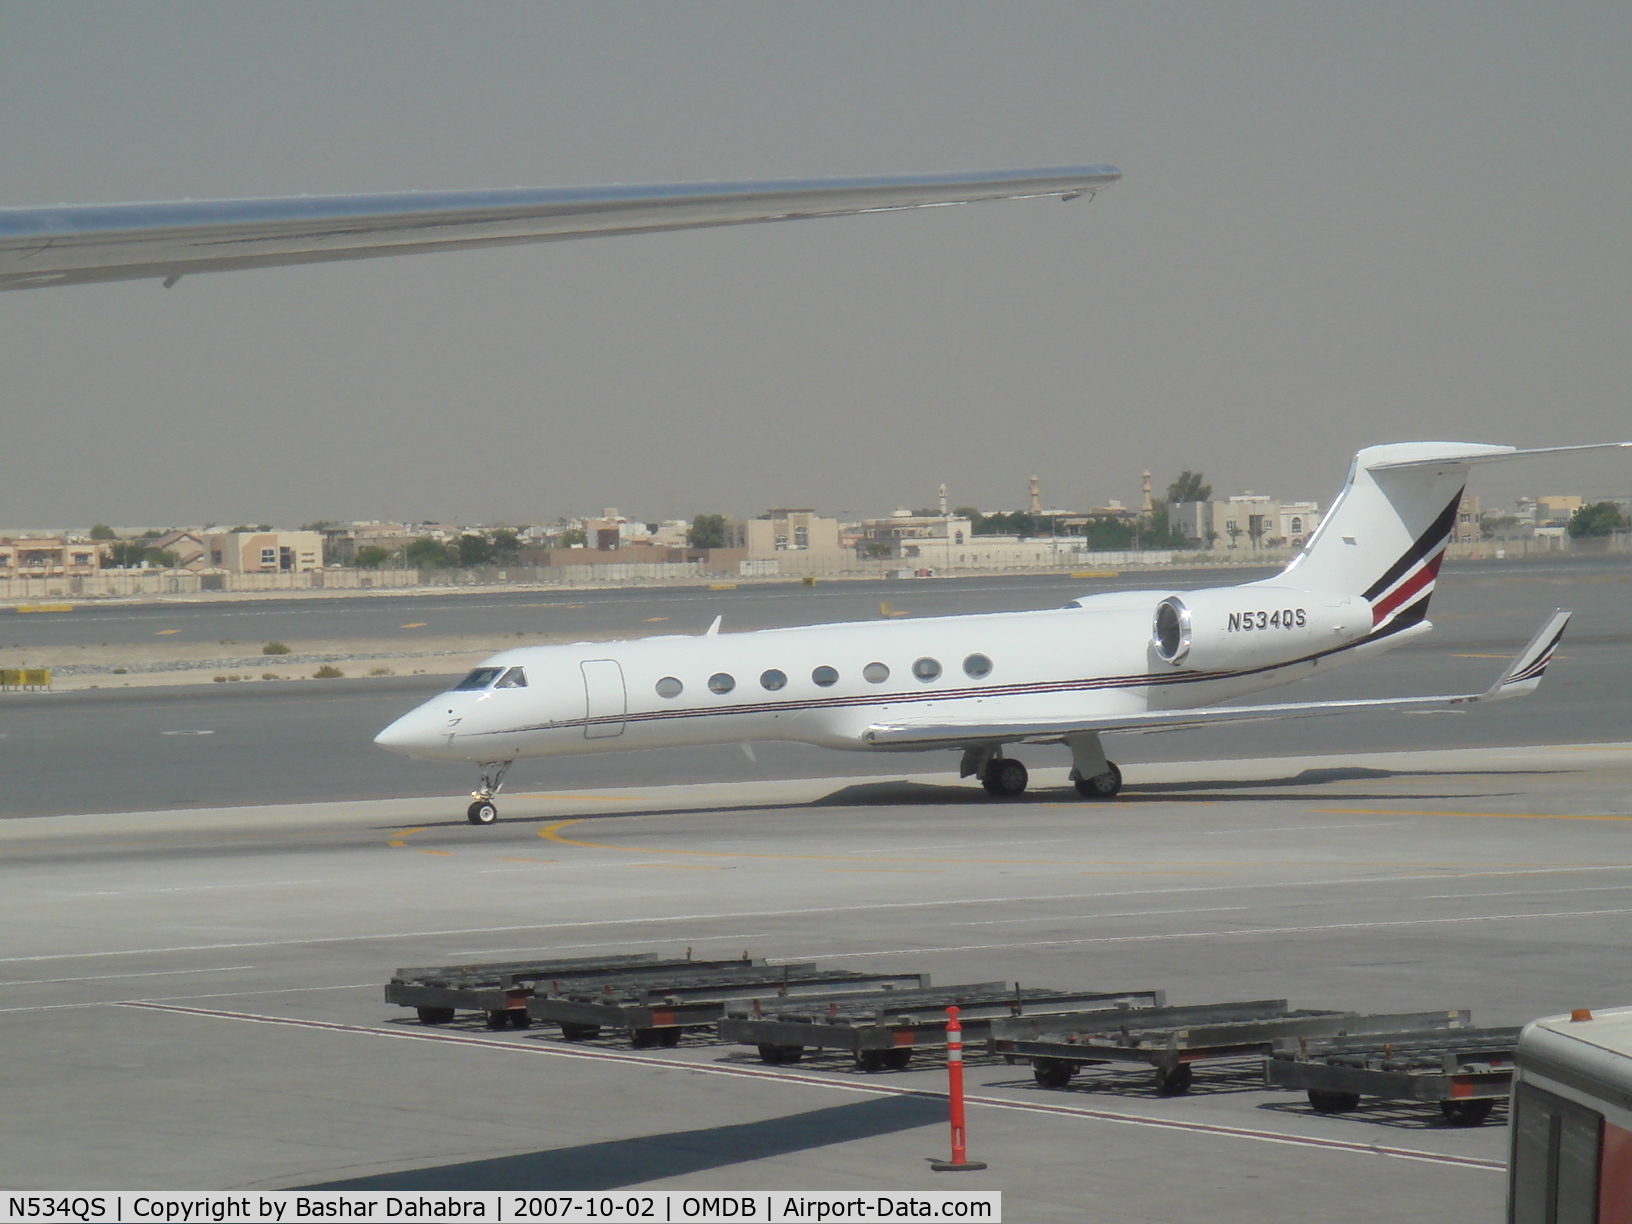 N534QS, 2006 Gulfstream Aerospace GV-SP (G550) C/N 5103, Taxiing for take off from Dubai Private Jet Pavilion